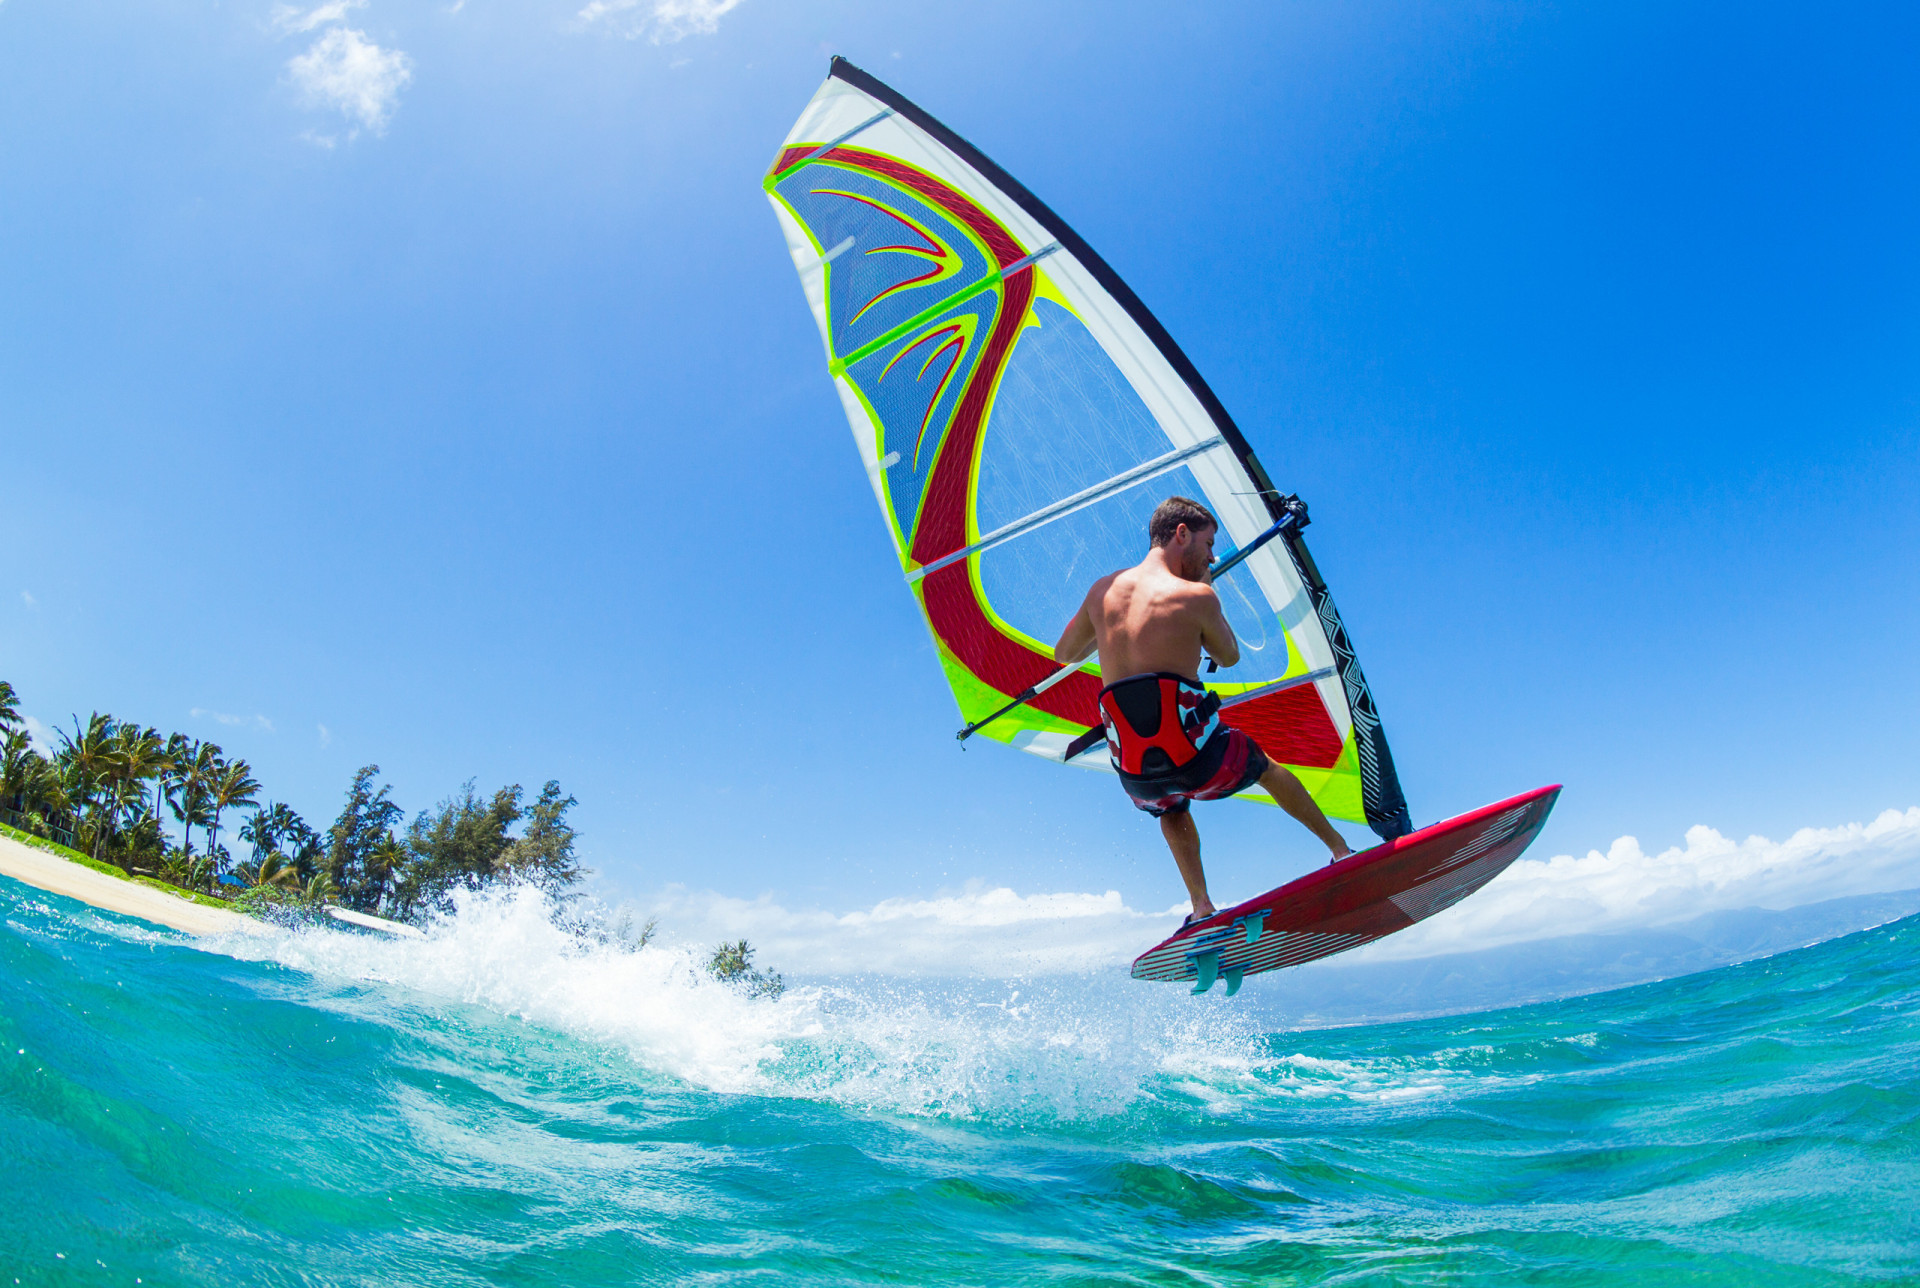 <p>Holidaying near a beach presents all sorts of <a href="https://www.starsinsider.com/lifestyle/473998/water-sports-you-must-try-this-summer" rel="noopener">watersport</a> activity opportunities. Are these activities included in the package, or offered as optional extras?</p><p><a href="https://www.msn.com/en-us/community/channel/vid-7xx8mnucu55yw63we9va2gwr7uihbxwc68fxqp25x6tg4ftibpra?cvid=94631541bc0f4f89bfd59158d696ad7e">Follow us and access great exclusive content every day</a></p>